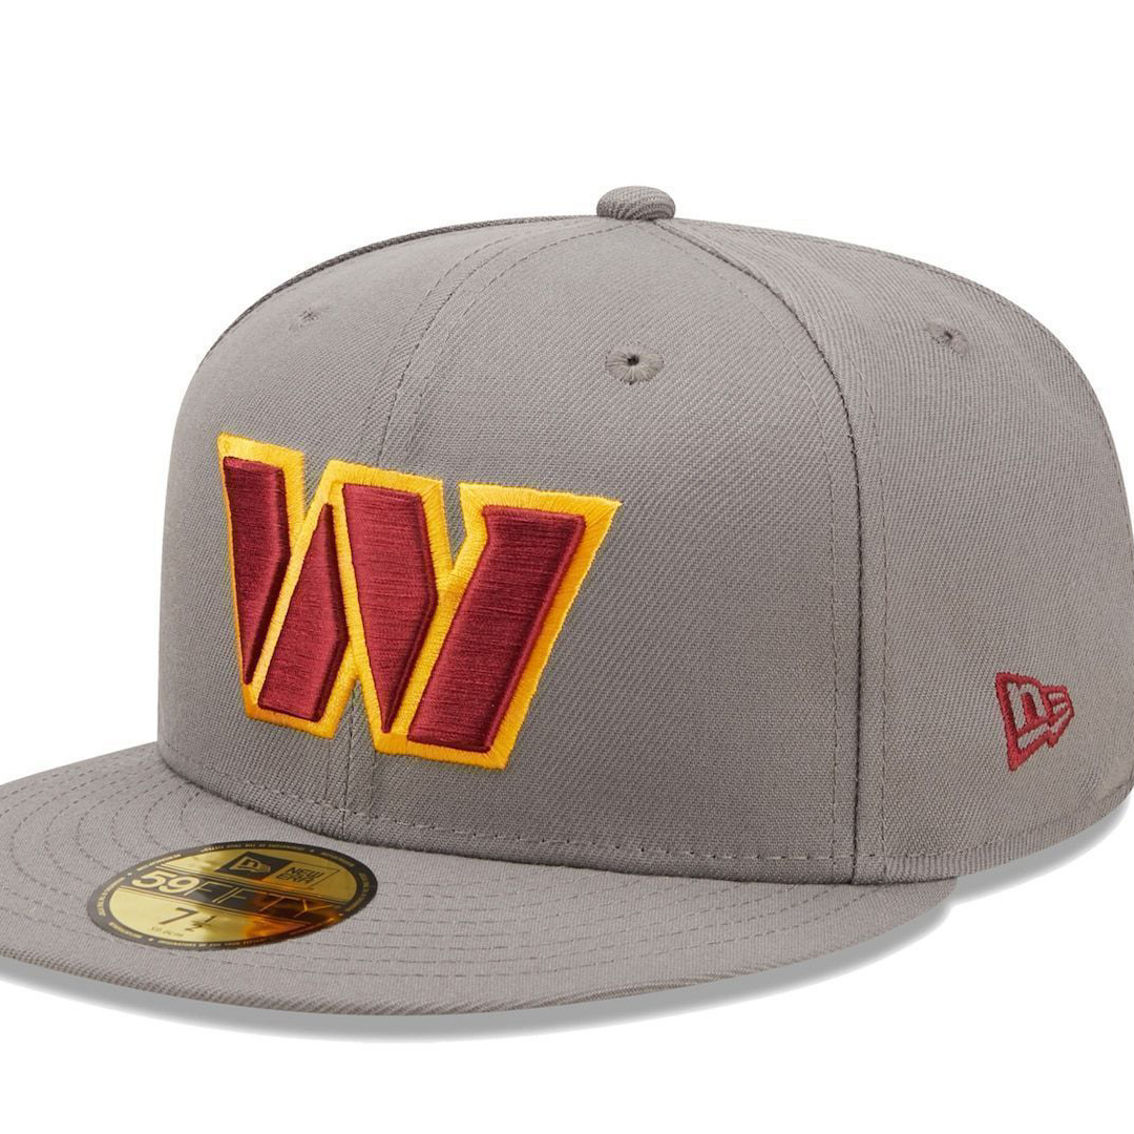 New Era Men's Graphite Washington Commanders Storm Ii 59fifty Fitted ...